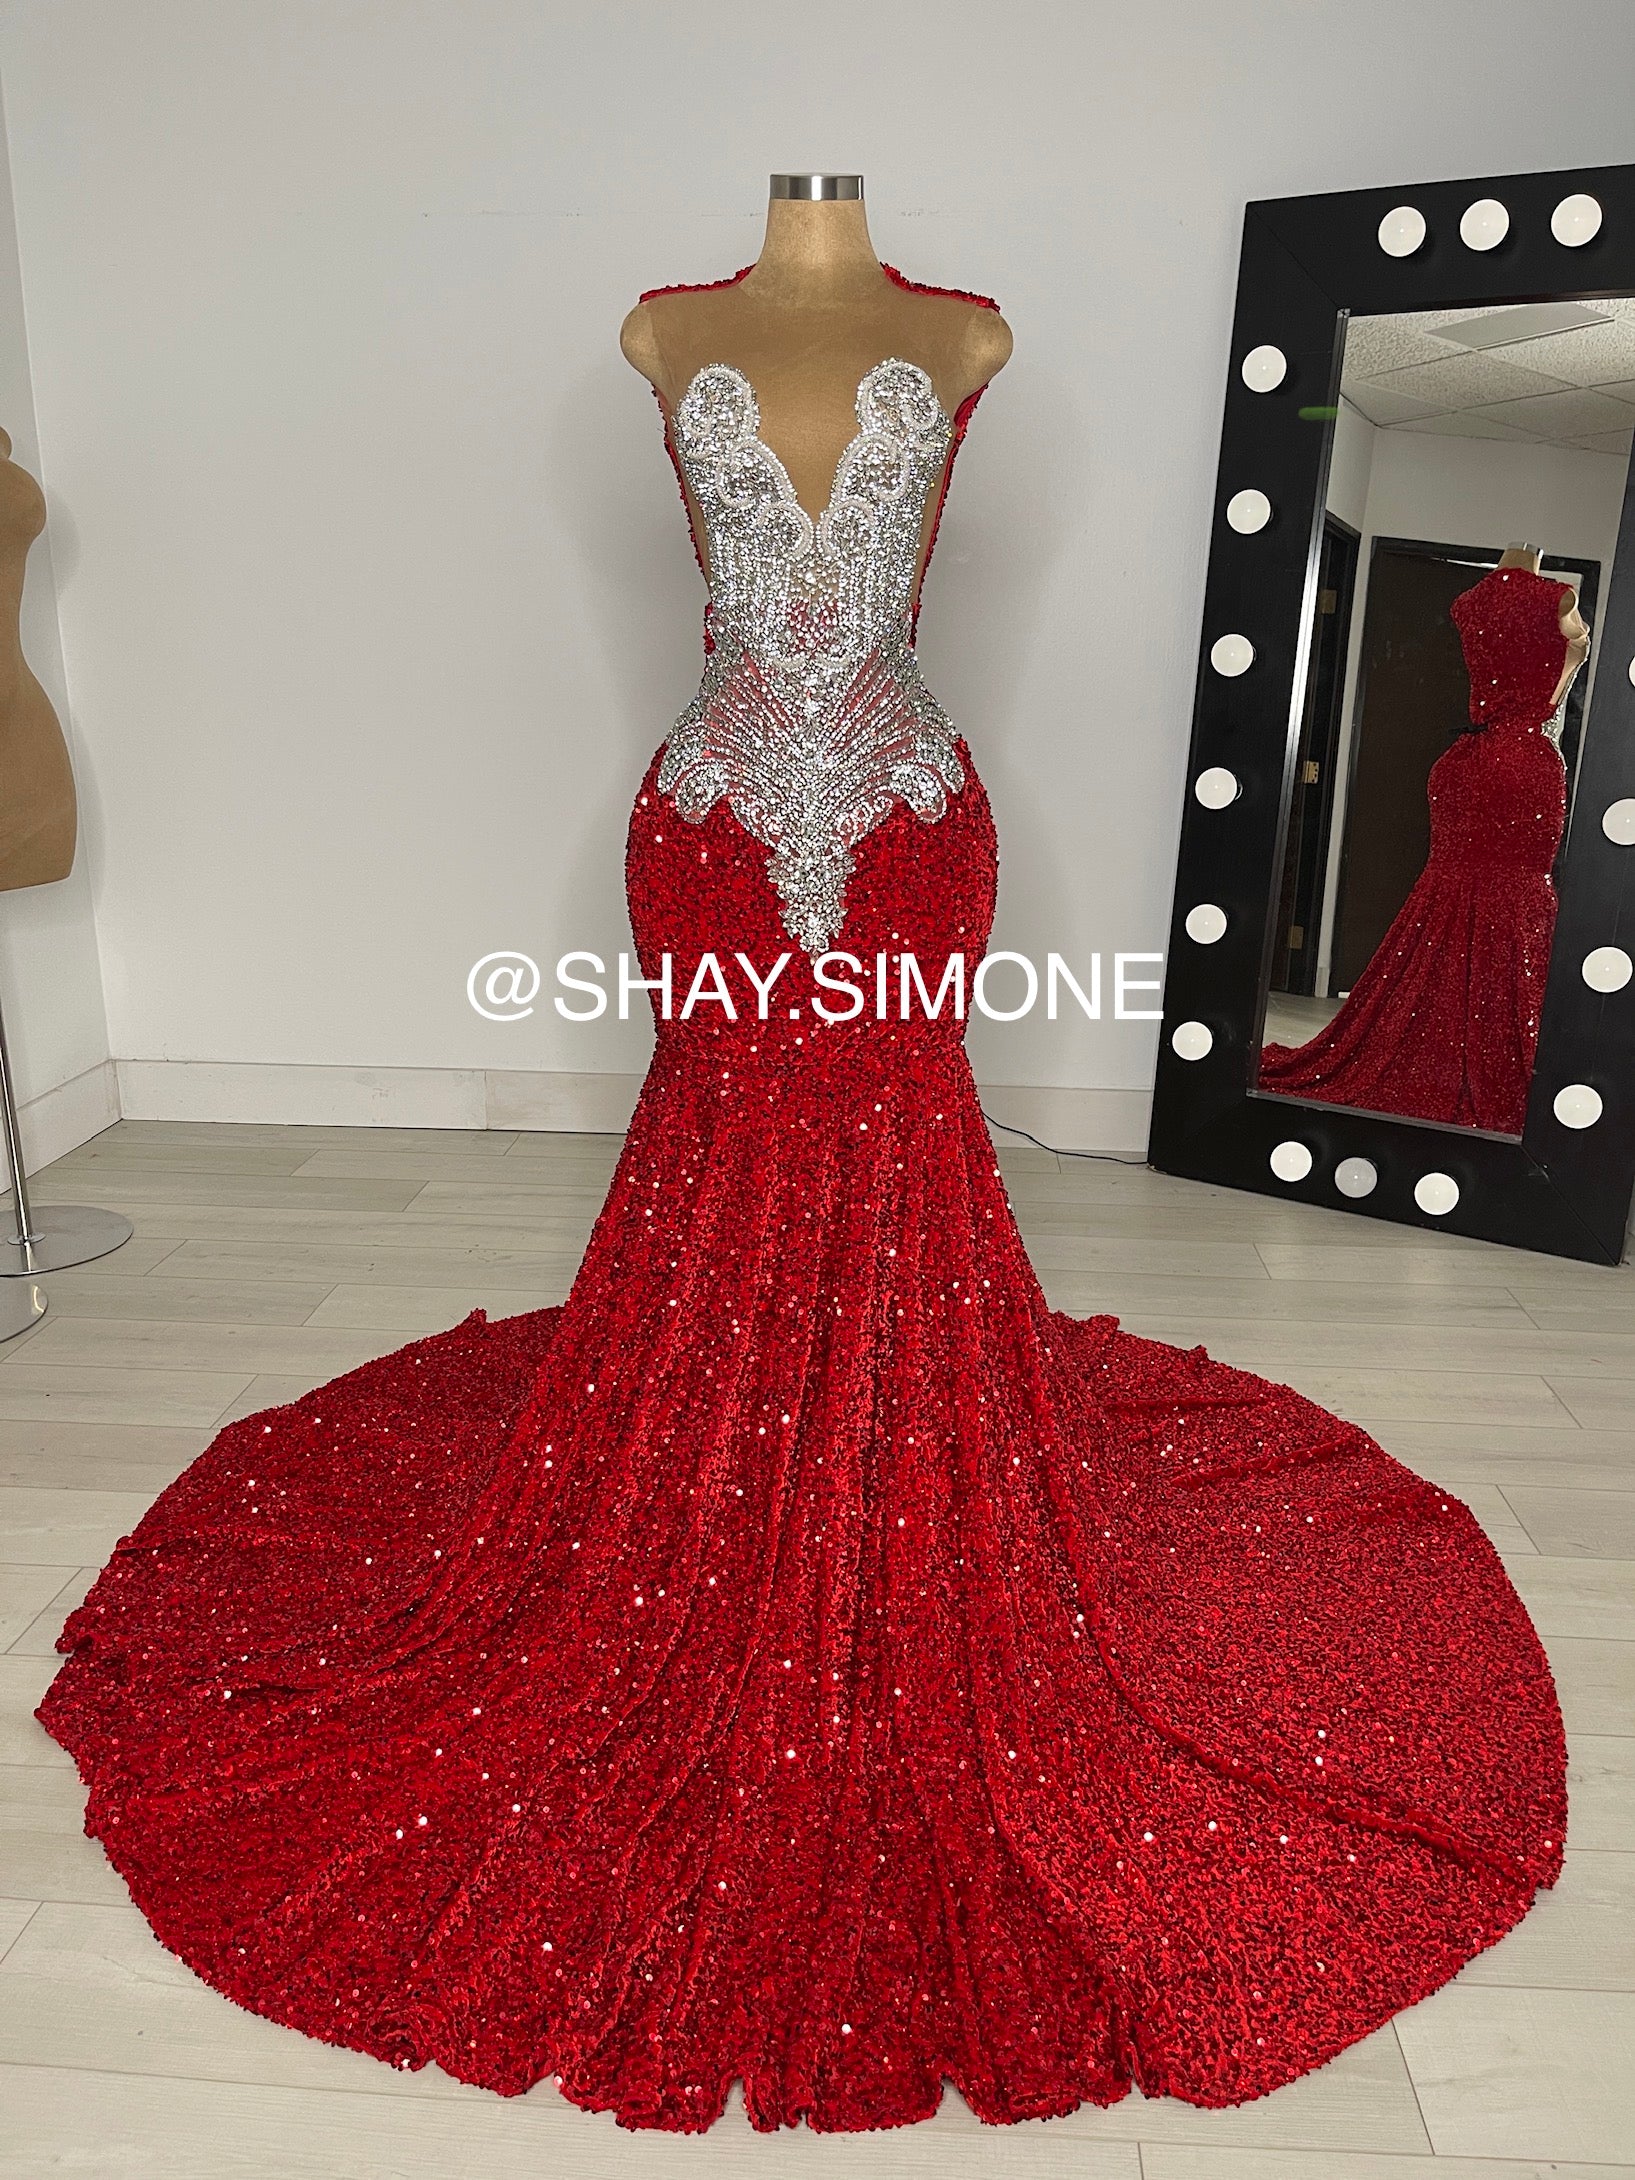 DESTINY - Red Sequin Prom Dress with Silver Rhinestones | PREORDER -  SHIP ESTIMATED: 05/07